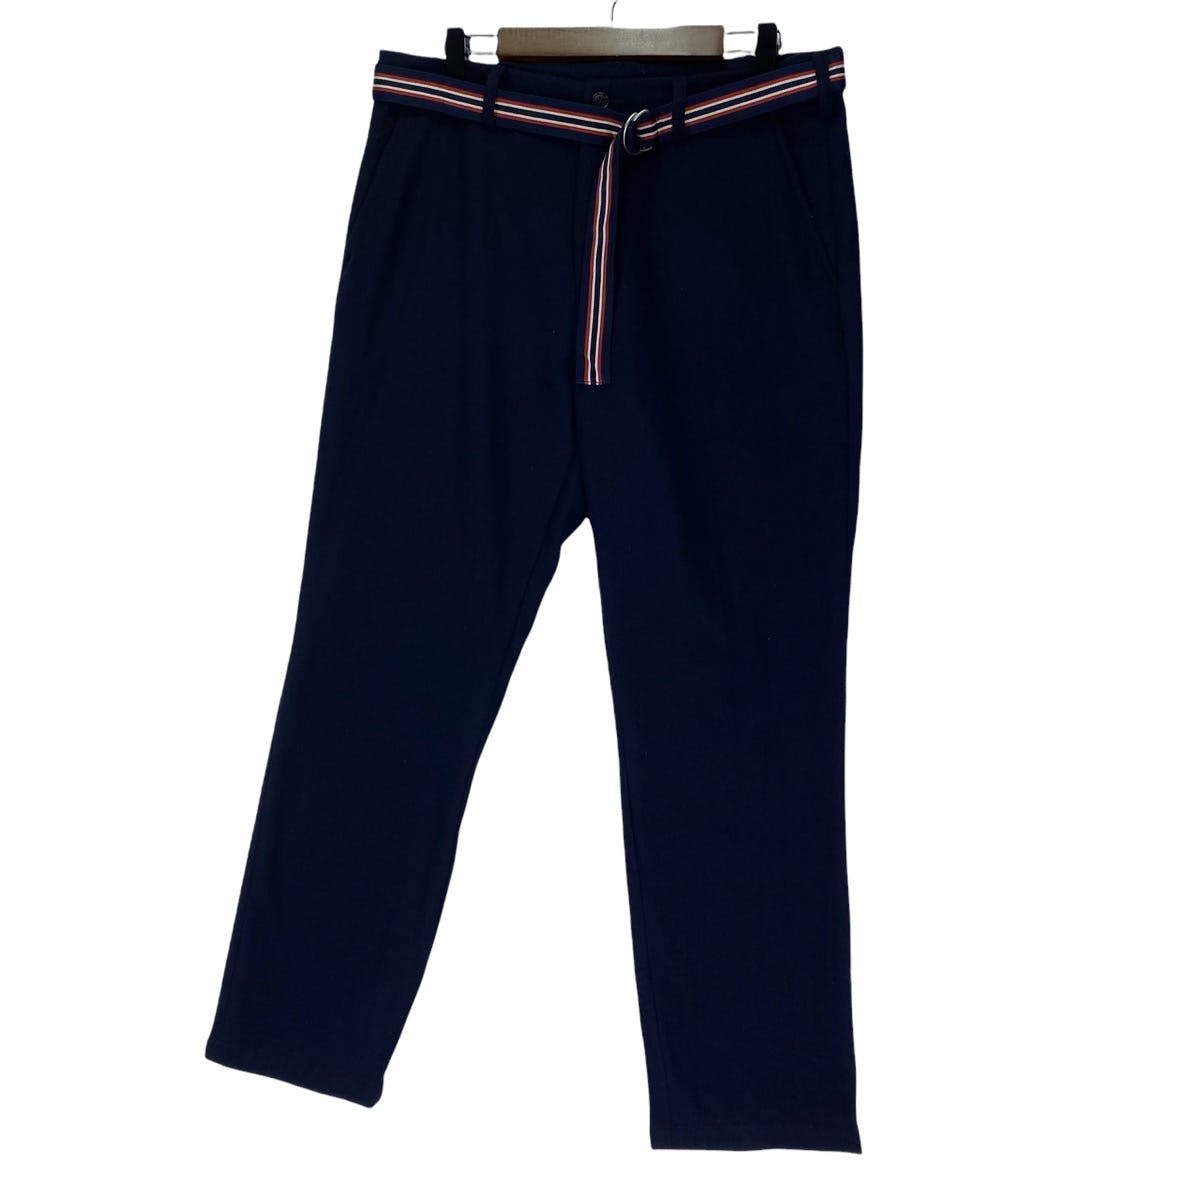 Fred Perry Navy Blue Trouser - 8